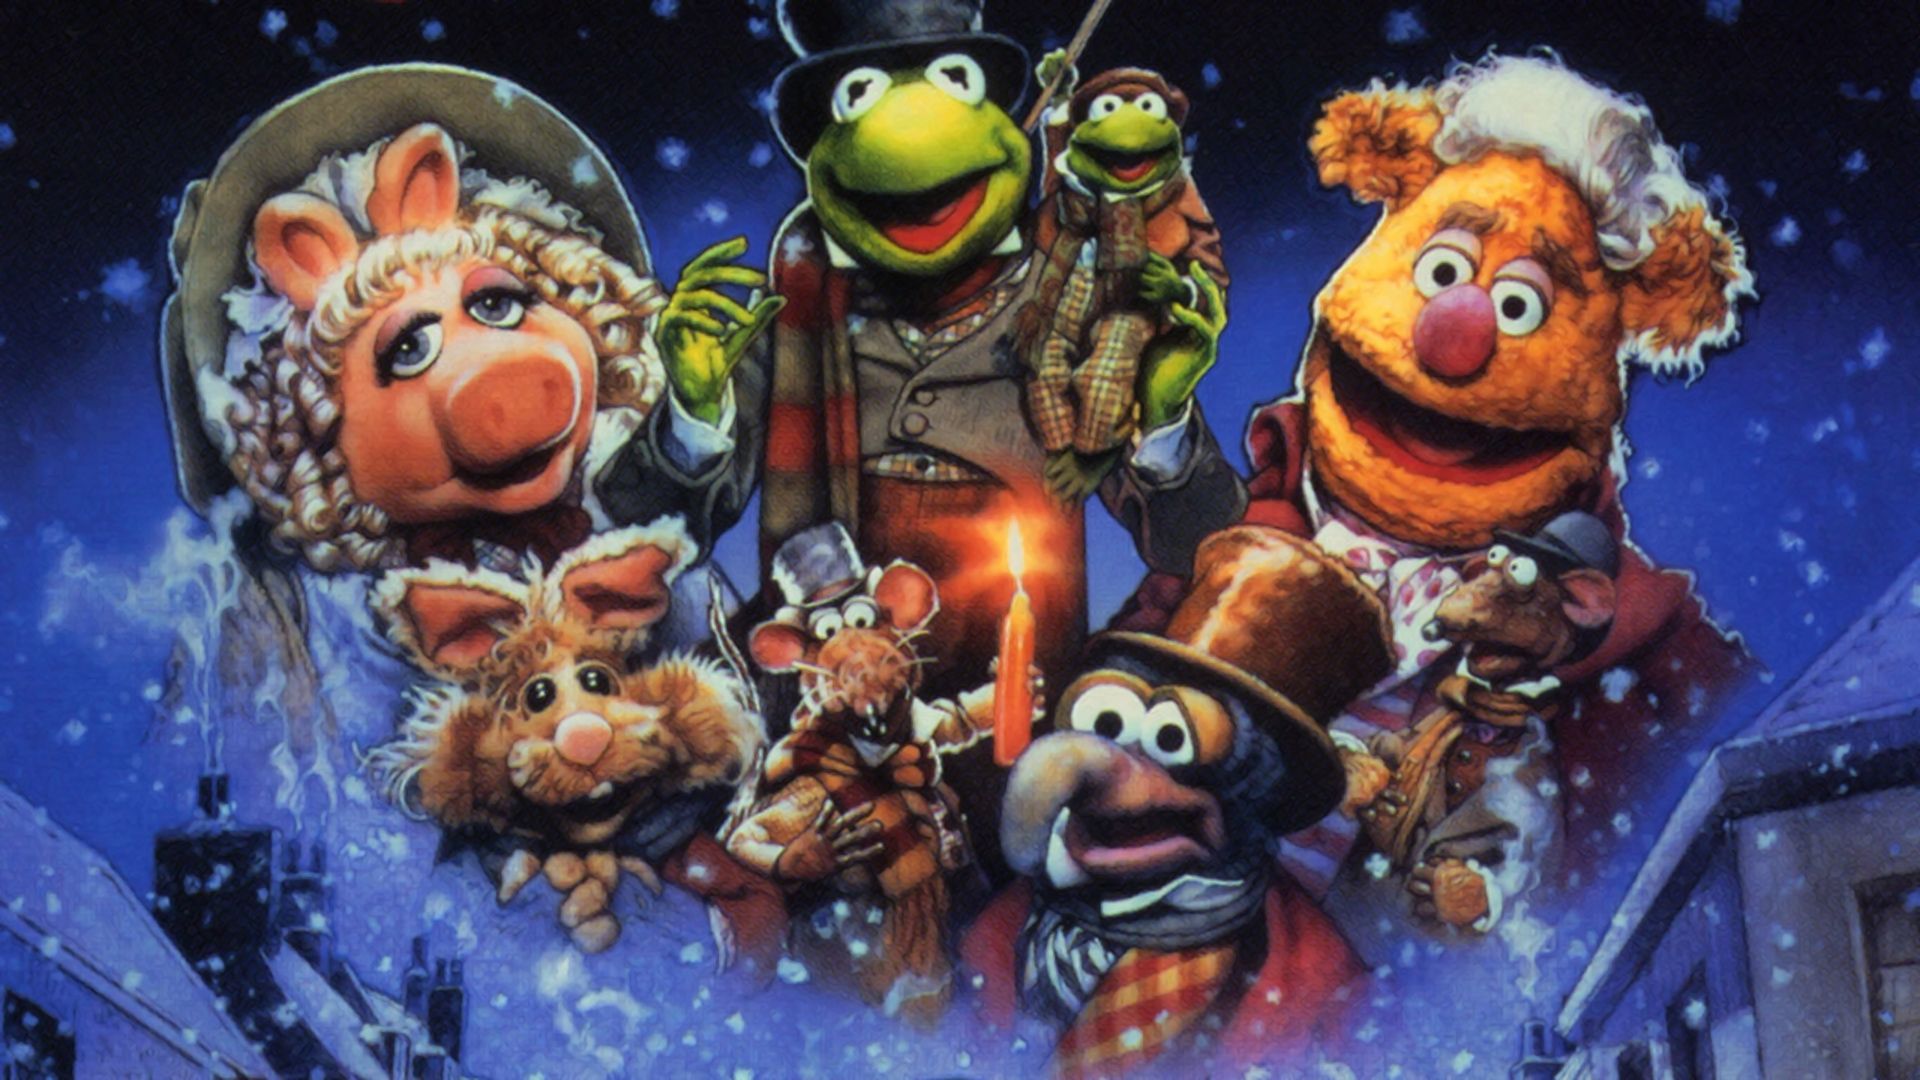 The Muppet Christmas Carol background